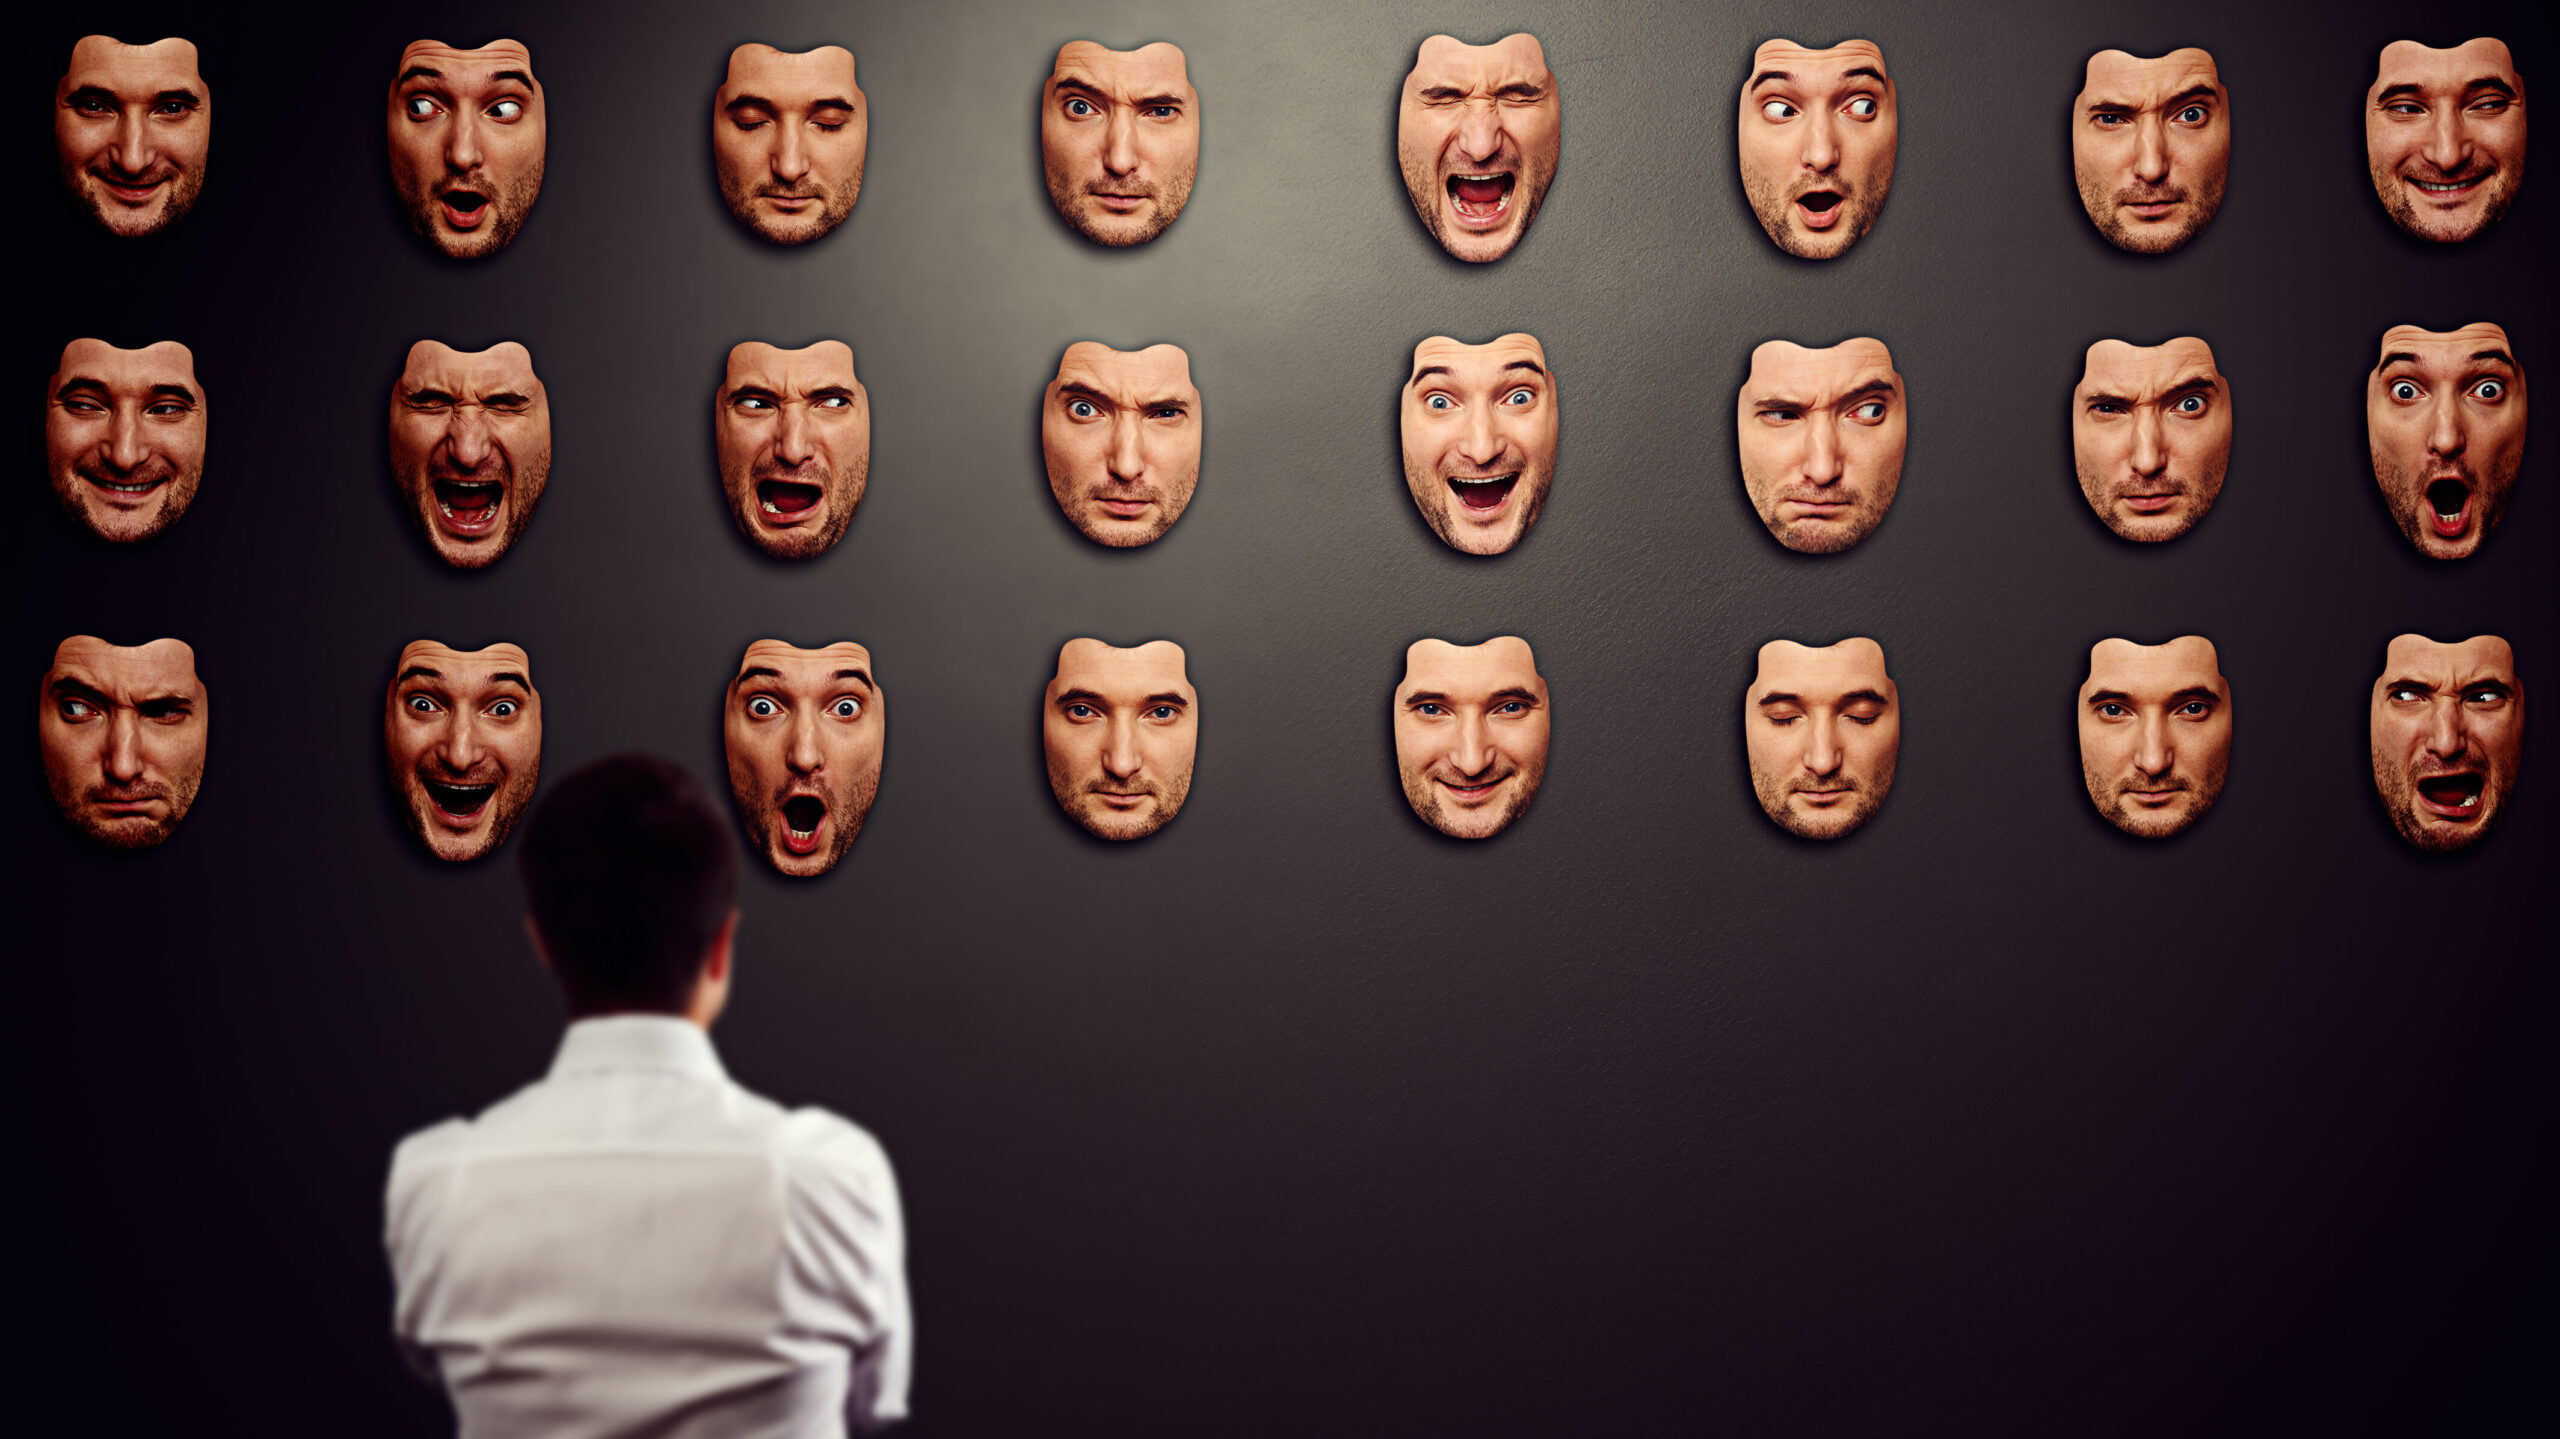 Series of Masks on a Wall with One Mirror: This represents the different facades people with impostor syndrome might feel they need to wear, with the mirror symbolizing the true self that narrative coaching helps reveal. authenticity versus perceived fraudulence.